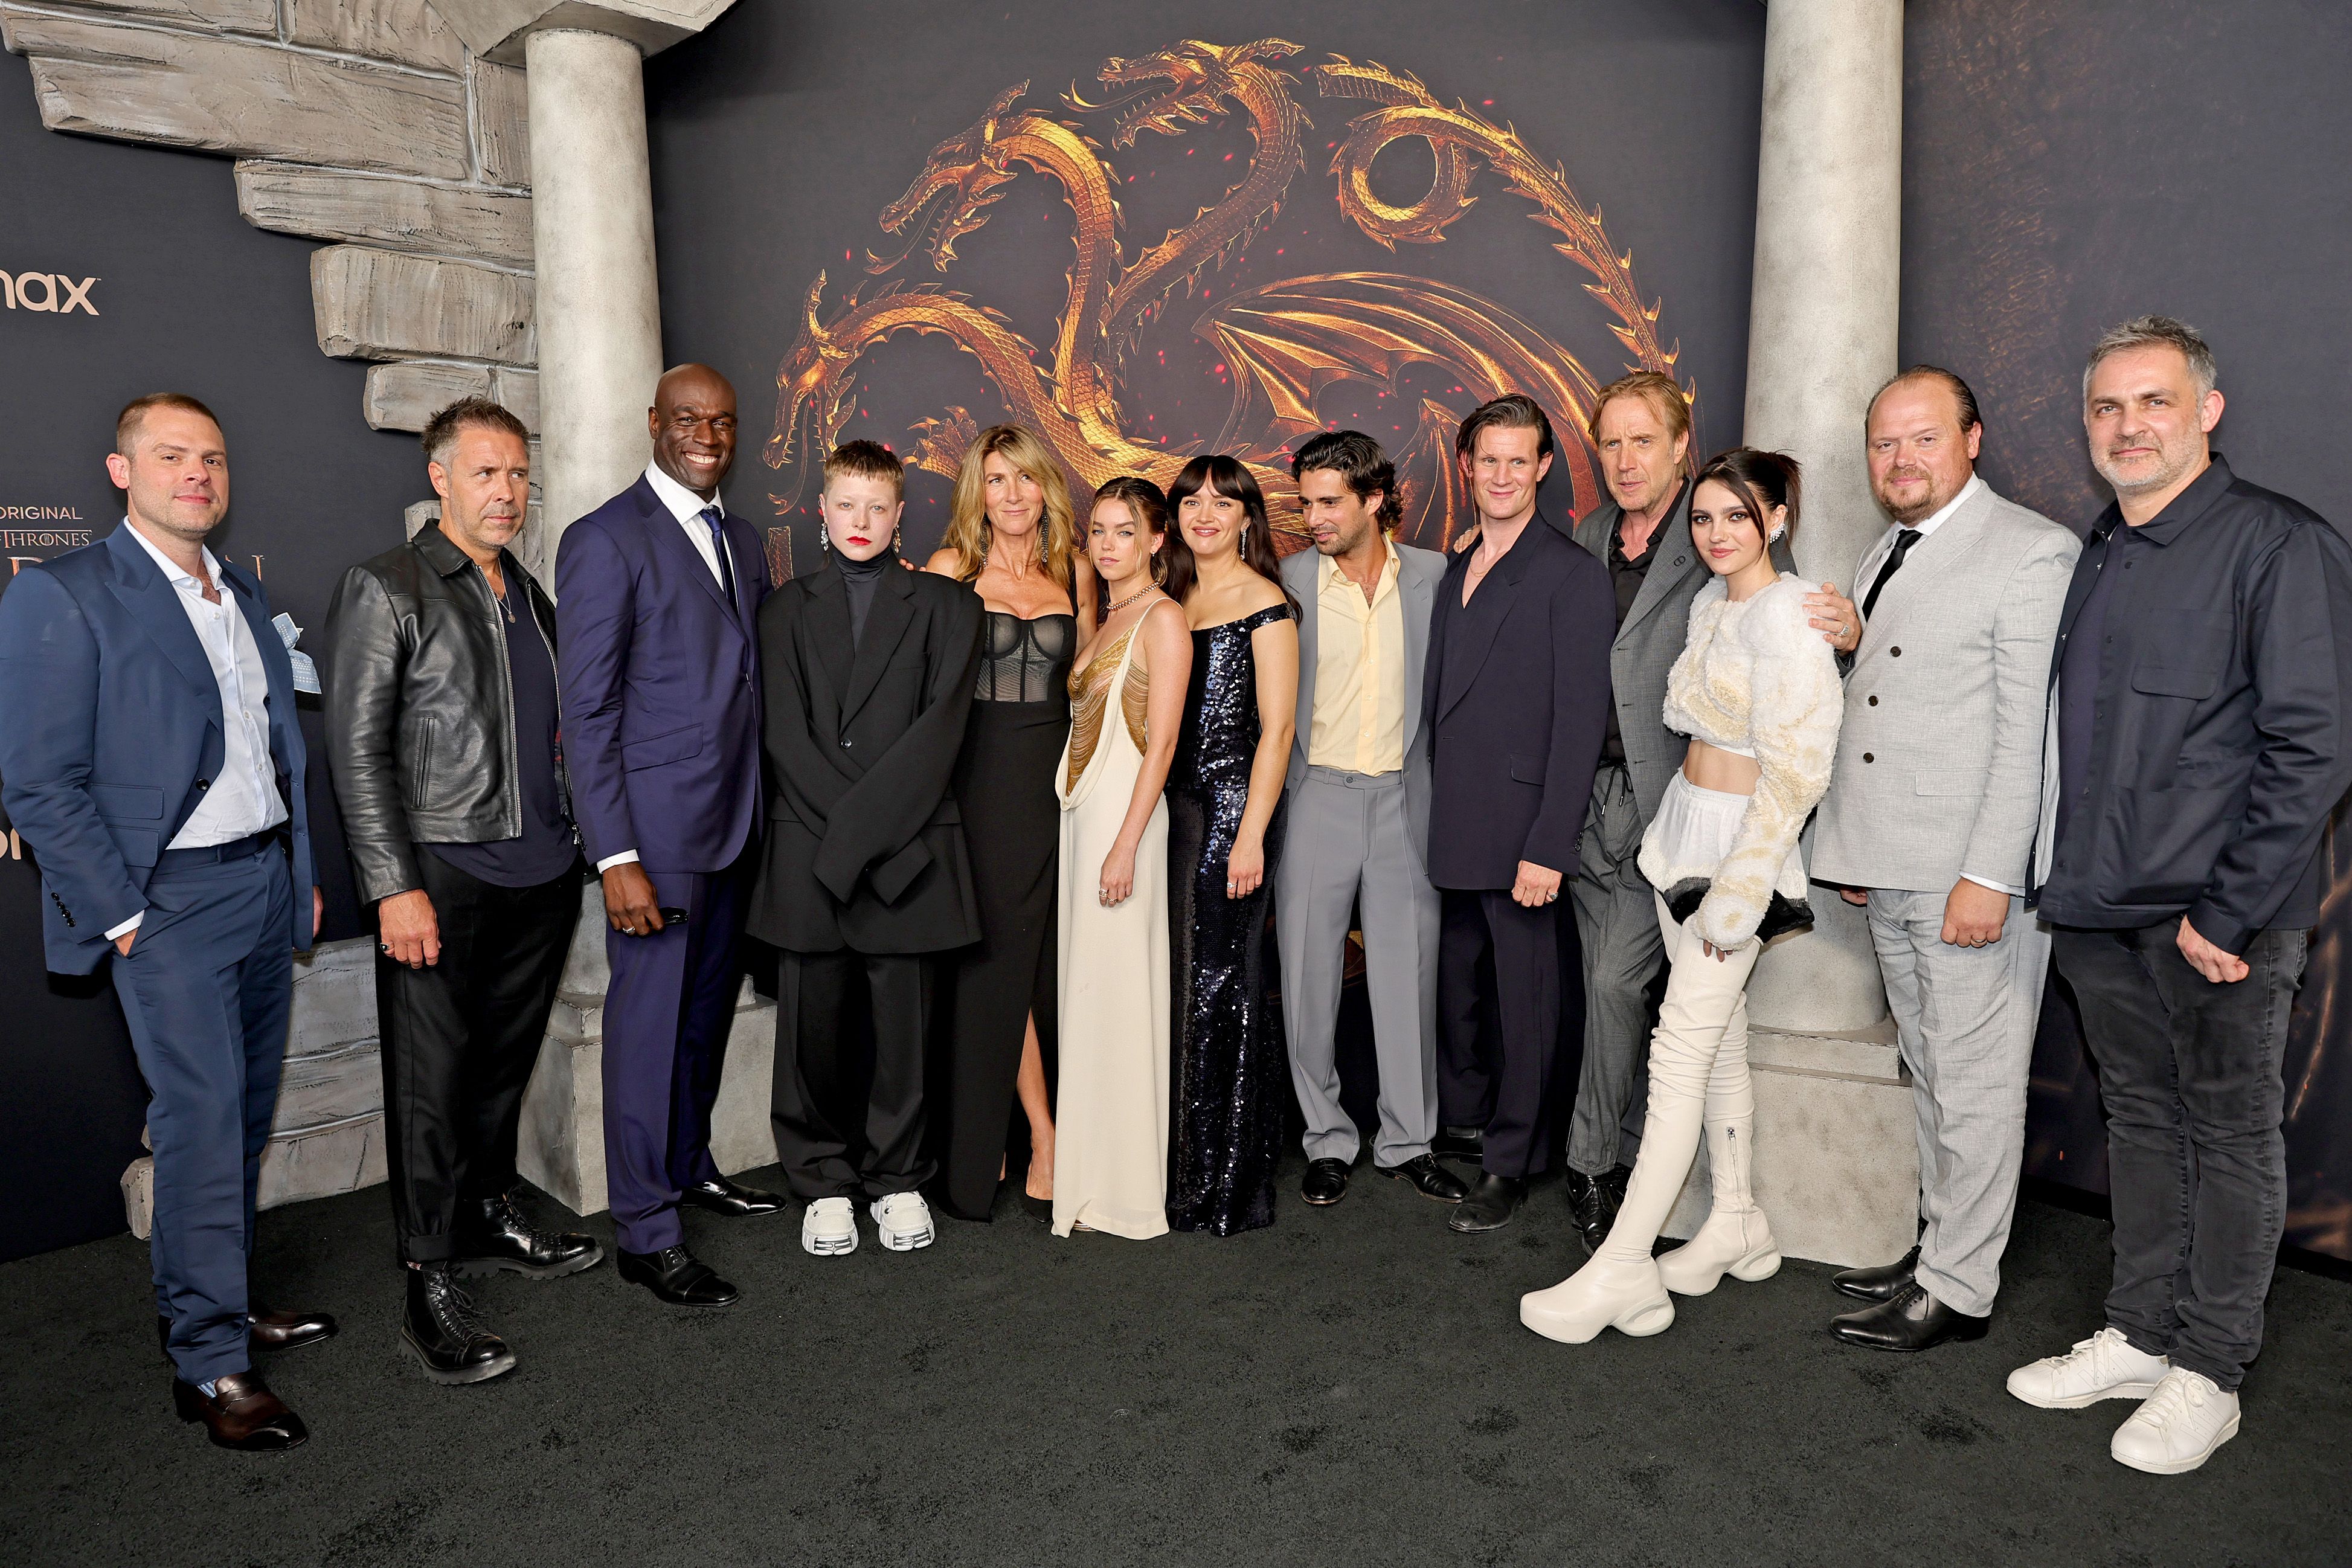 House Of The Dragon Season 2 – Release Window, Cast, And More Info